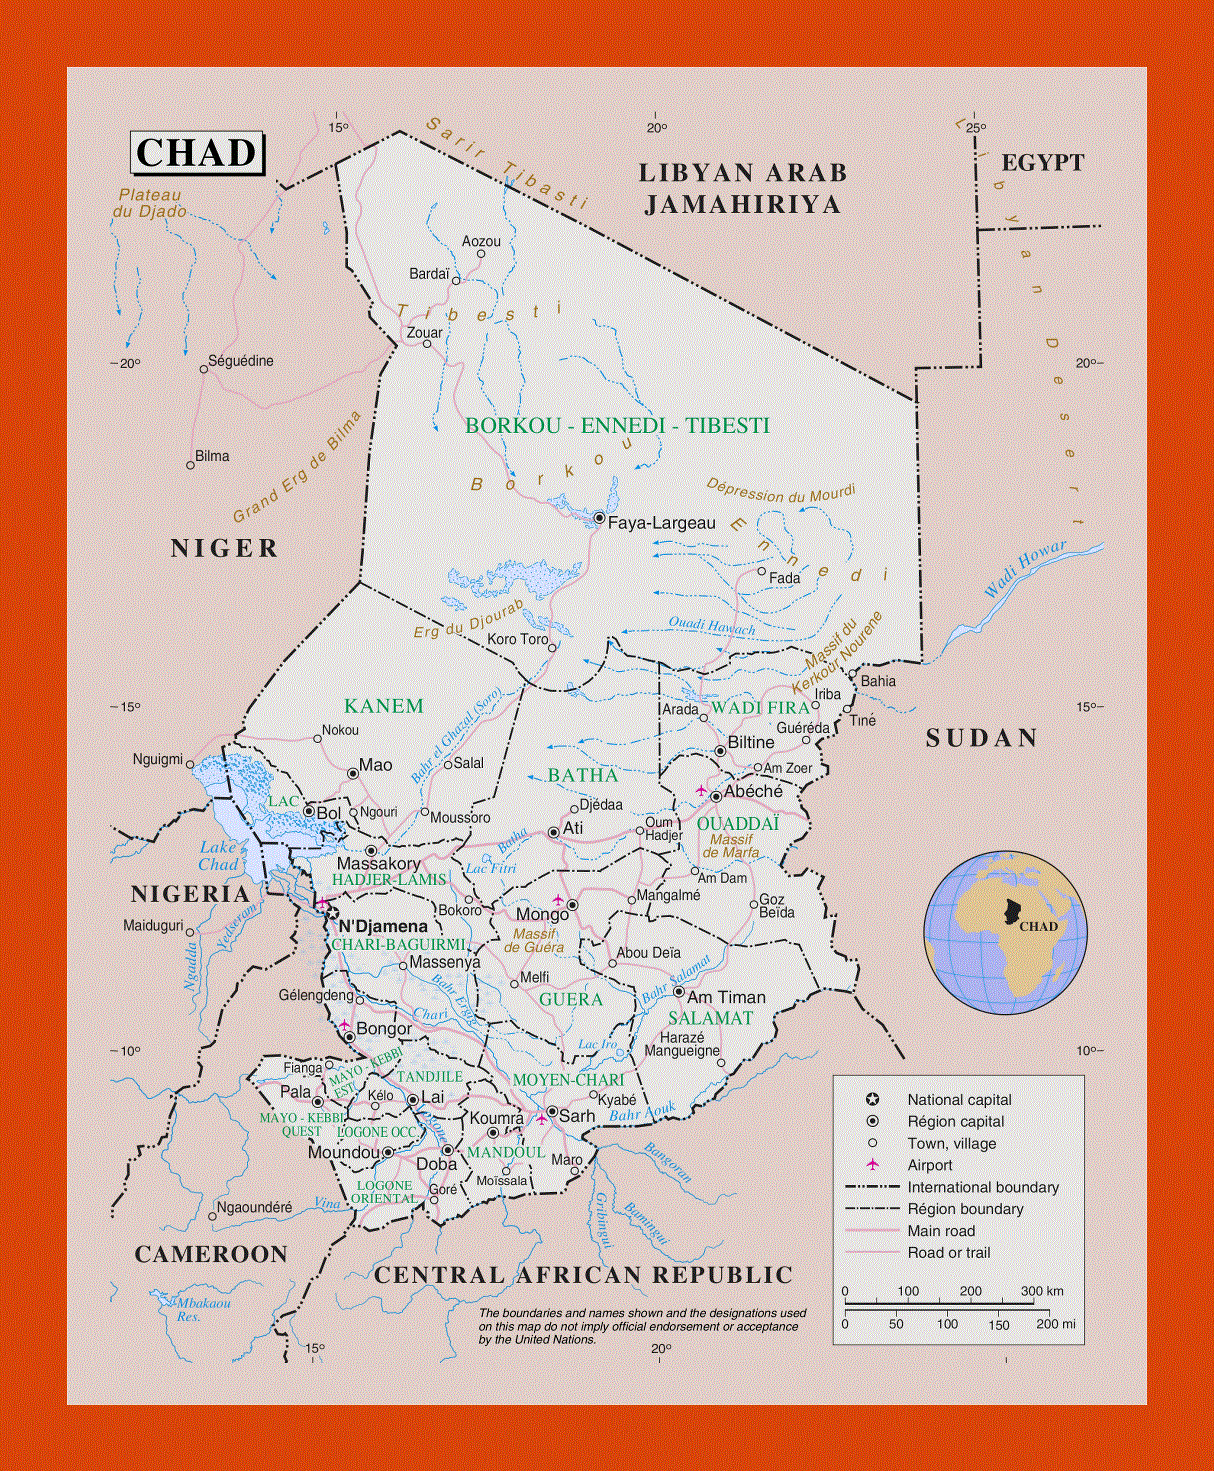 Political and administrative map of Chad